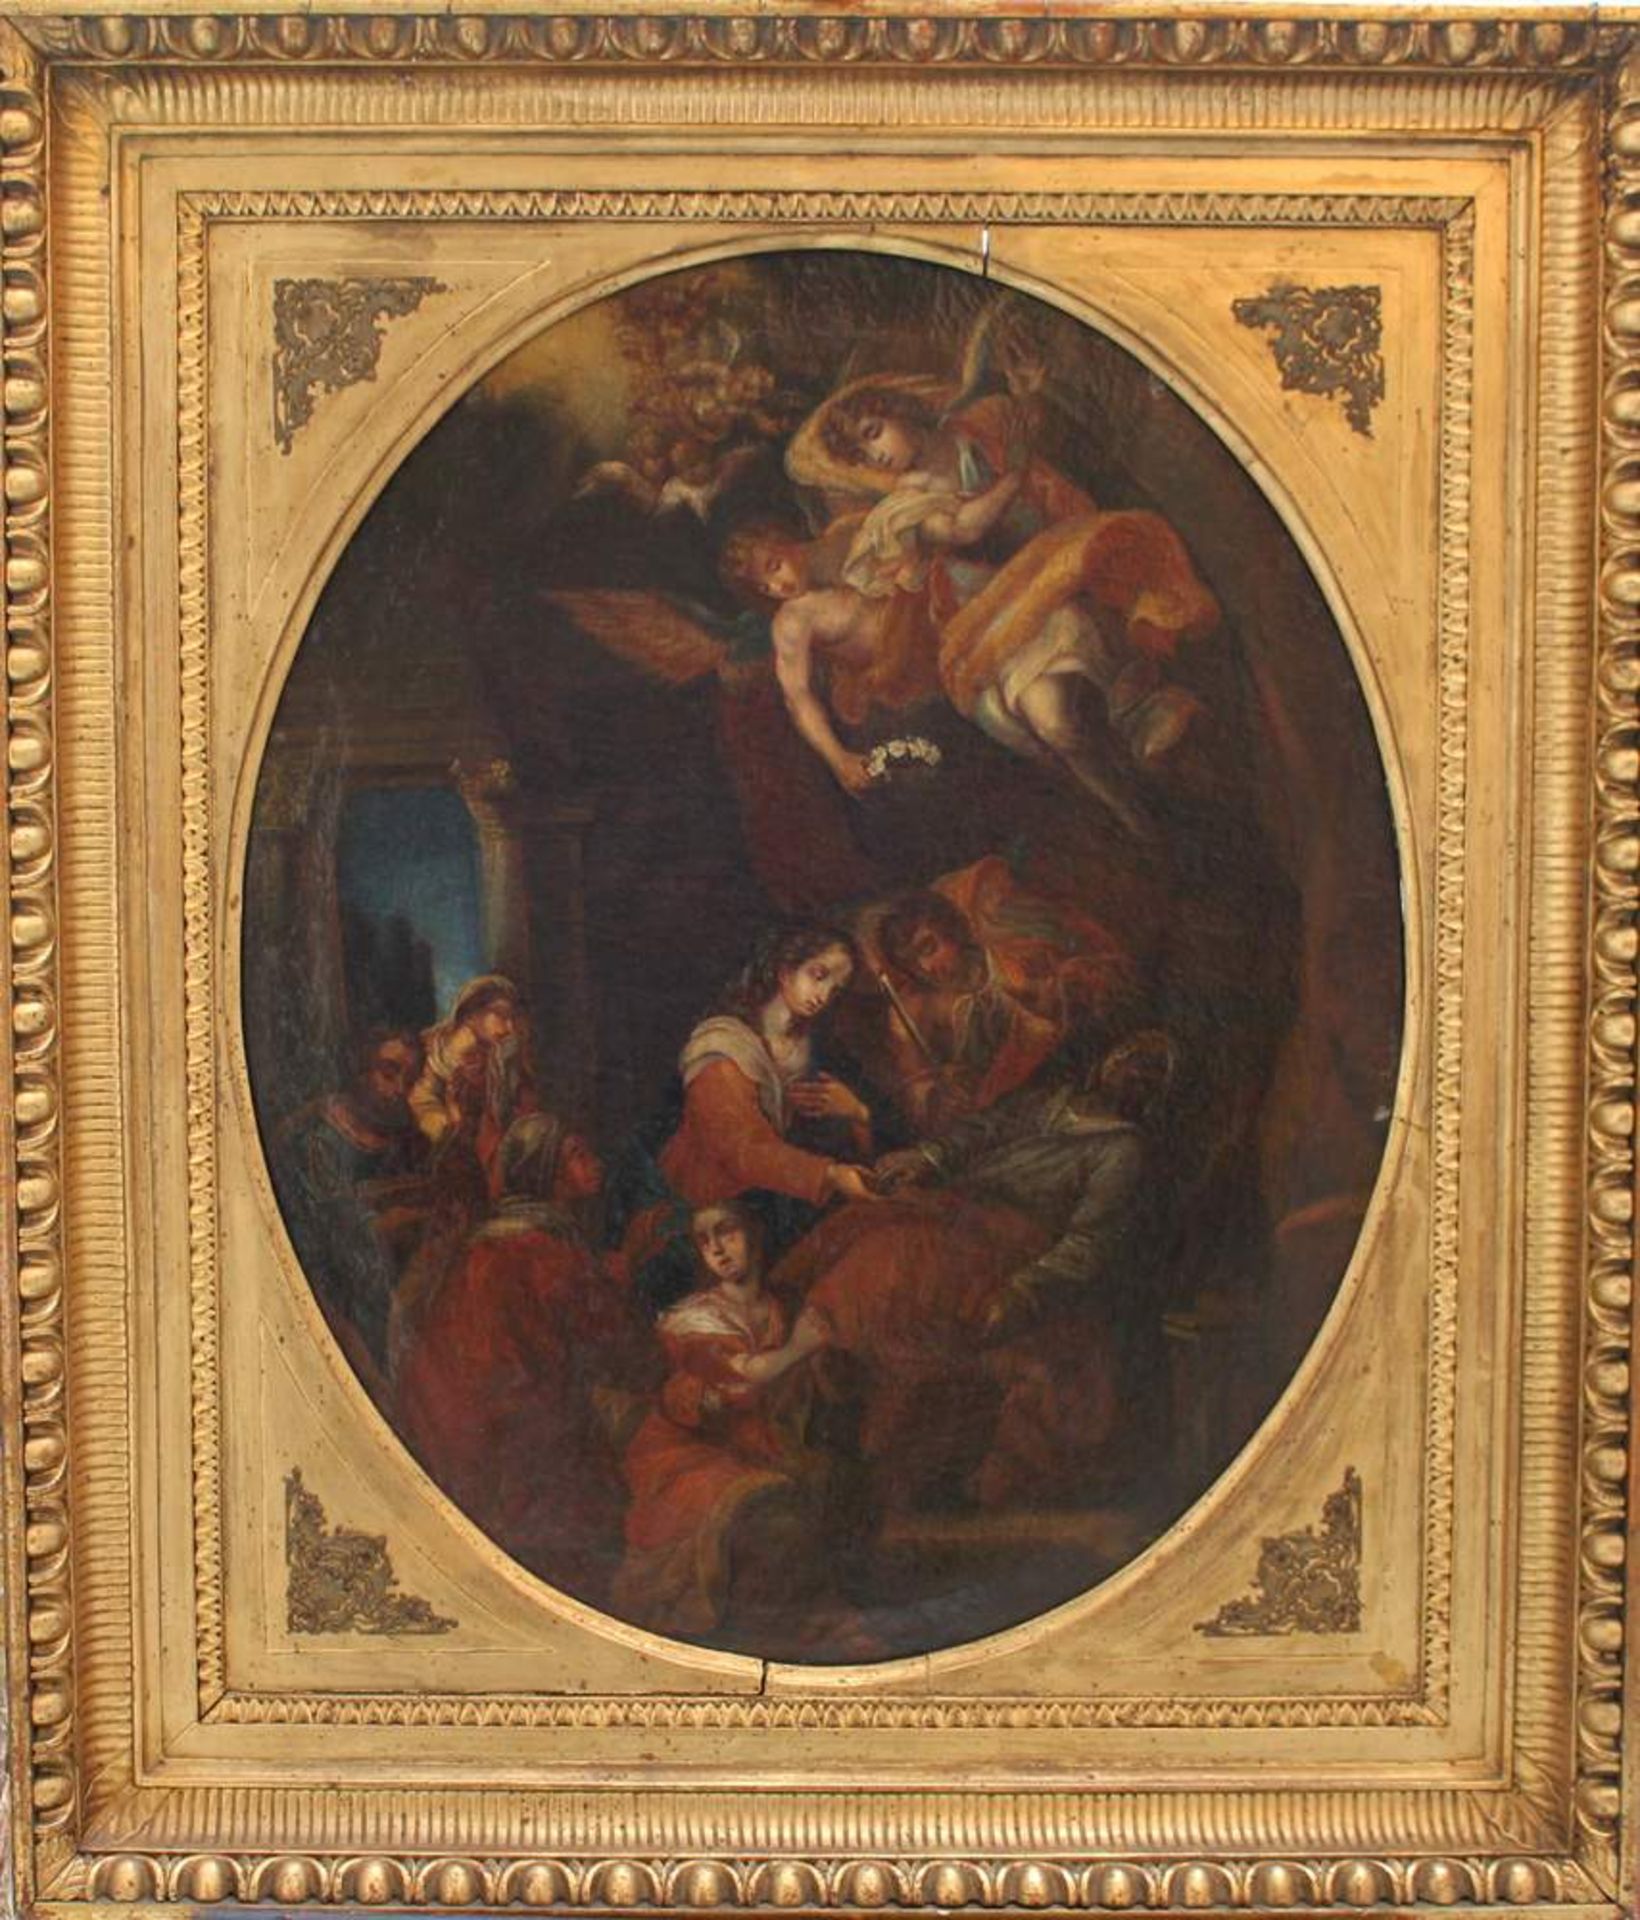 Giuseppe Nuvolone (1619-1703)-attributed, Death of Saint Anne, painted in oval, oil on canvas; in